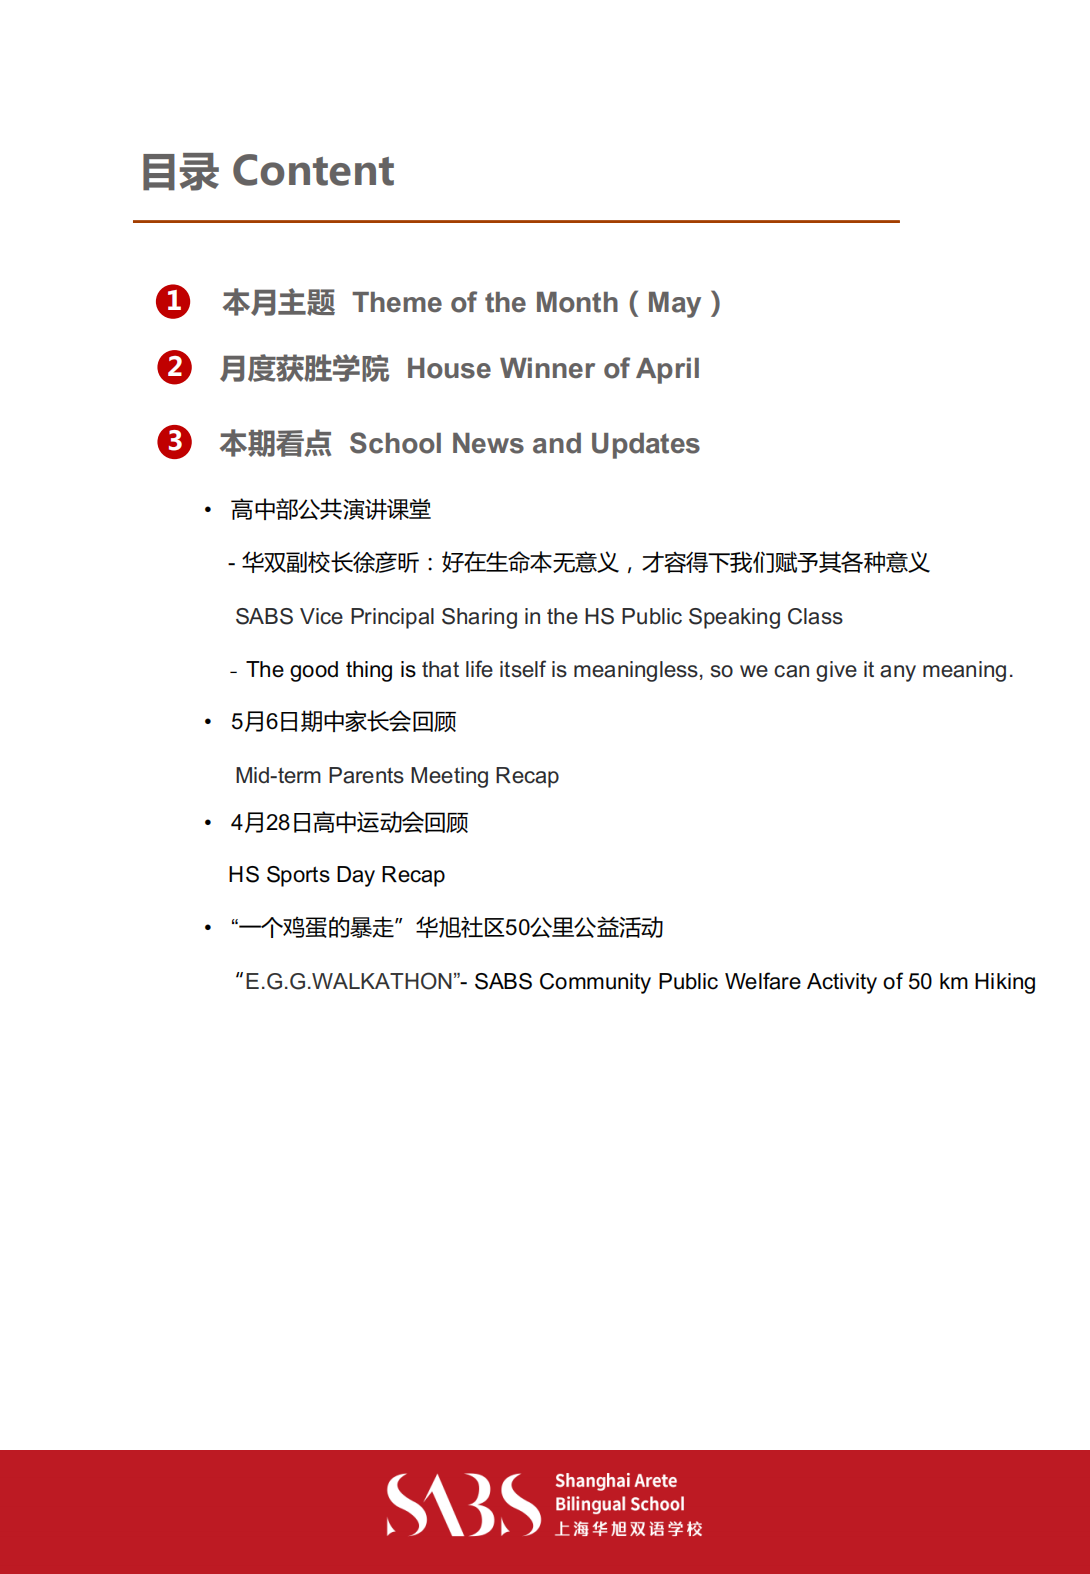 HS 6th Issue Newsletter pptx（English)_01.png